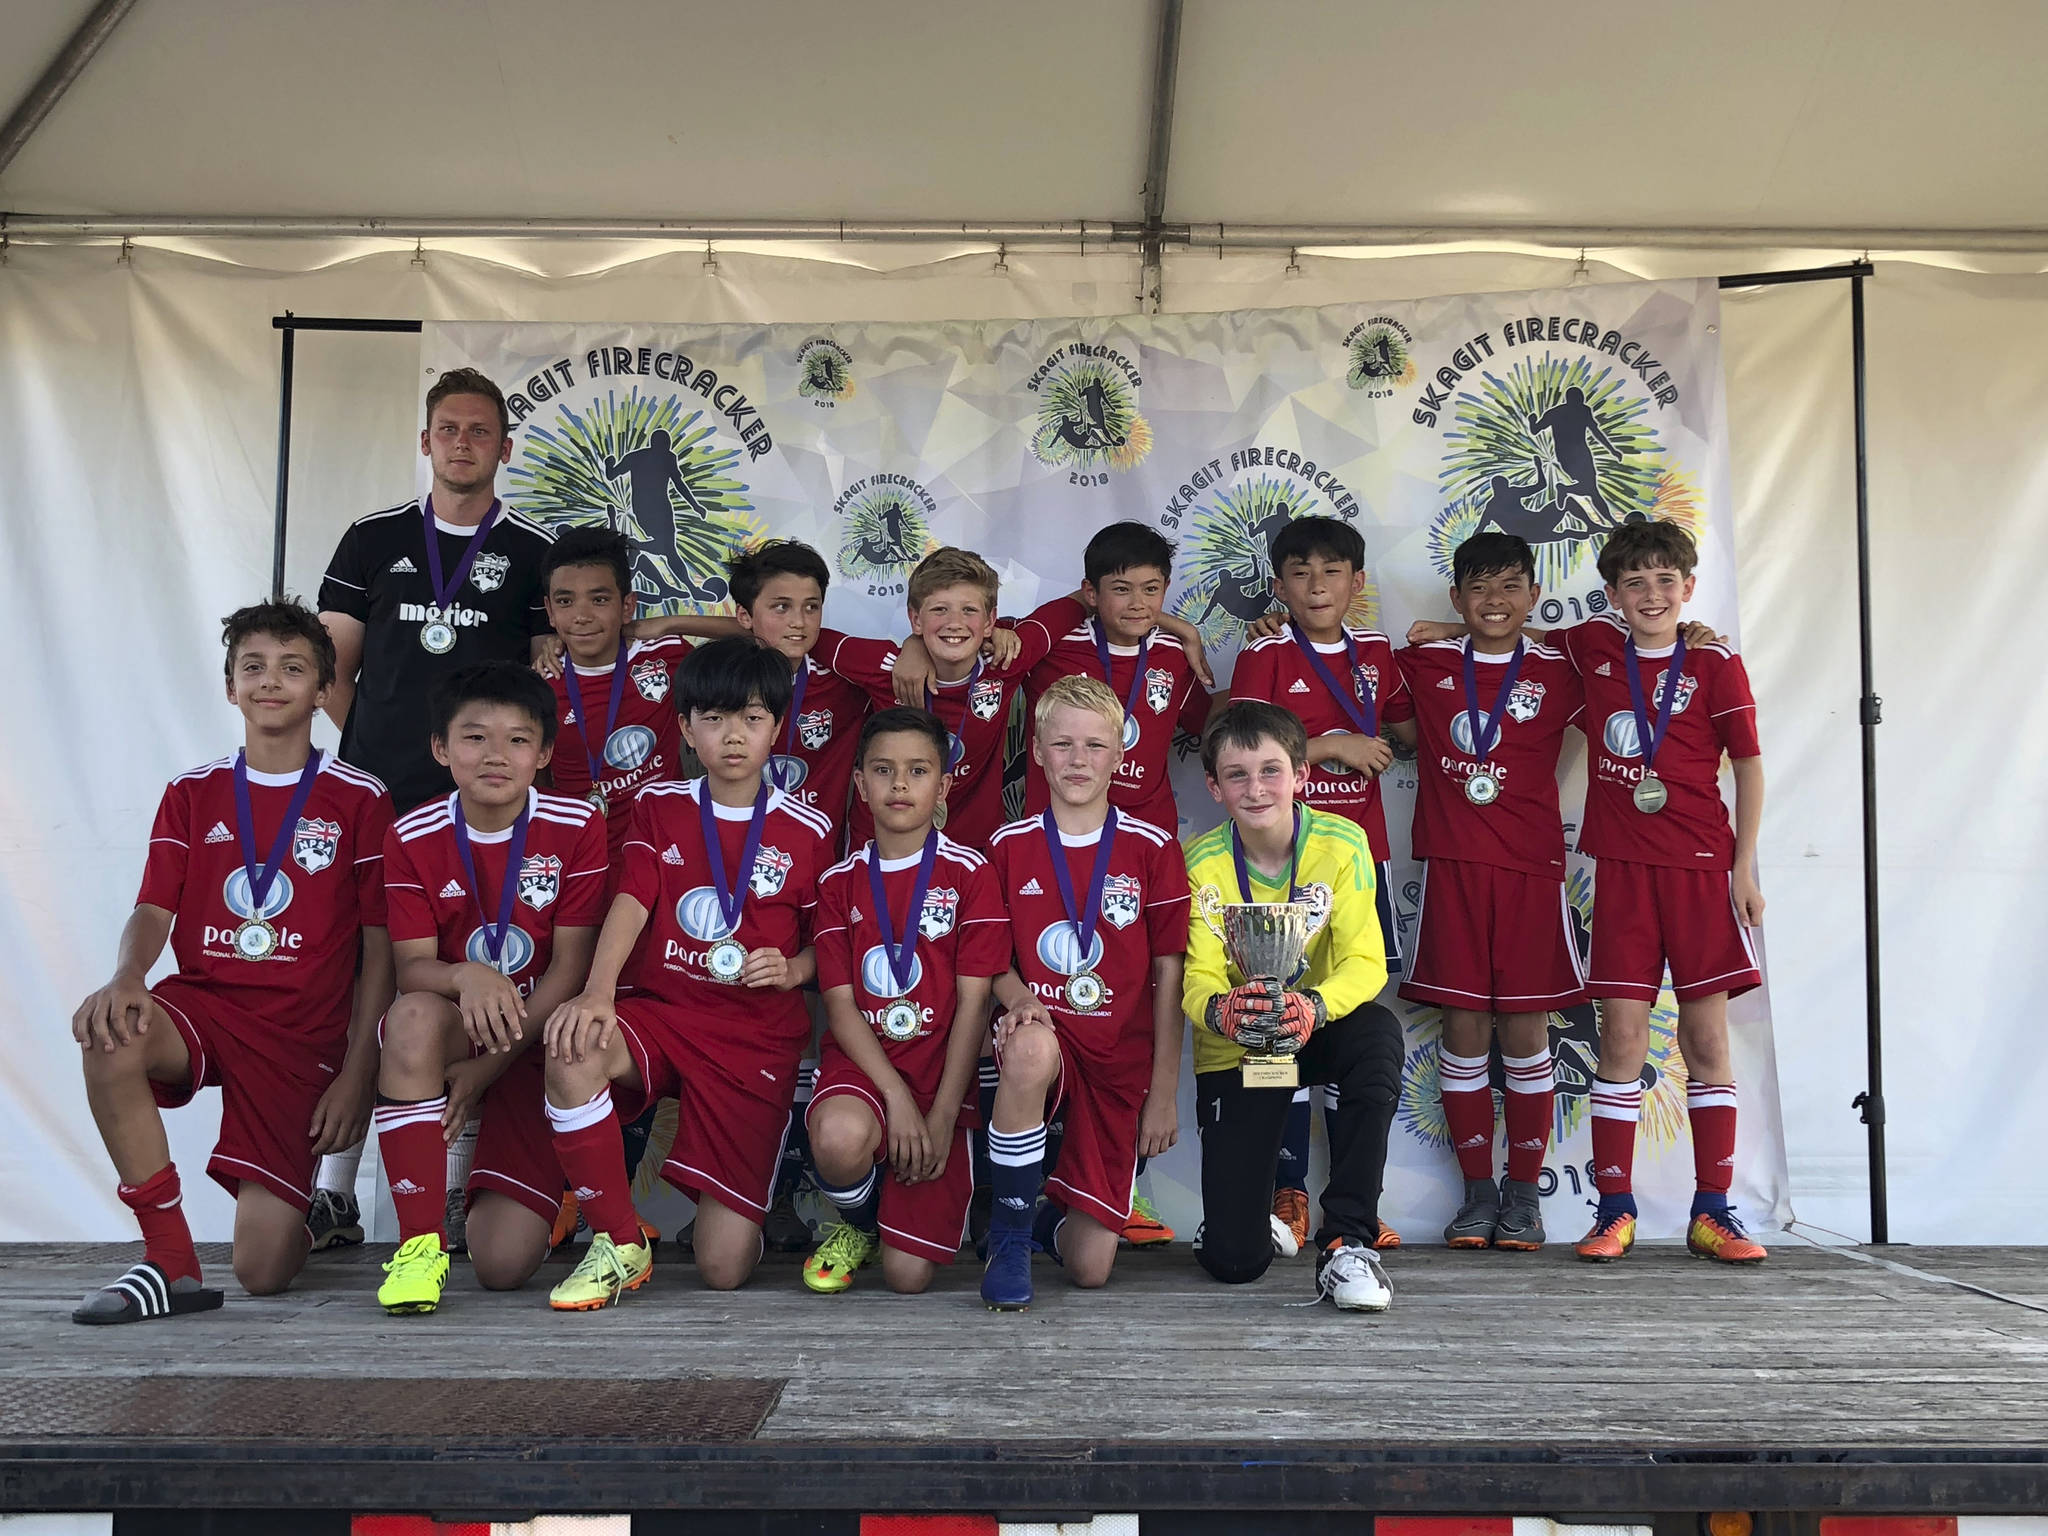 The NPSA Titans 06 boys soccer team, which is coached by Jack Sturgess, captured first place at the Skagit Firecracker tournament in their division on June 17 in Burlington.                                The Titans roster consisted of Aidan Rodey, Nick Chou, Kyler Anderson, Wyatt Acker, Lucas Shelton, Kai Kinoshita, Tanner Jones, Georgios Devekos, Atsufumi Nakanishi, Yusuf Ashmawi, Kousei Fujita, Colby Duenas and Ben Lamperti. Photo courtesy of Tom Acker